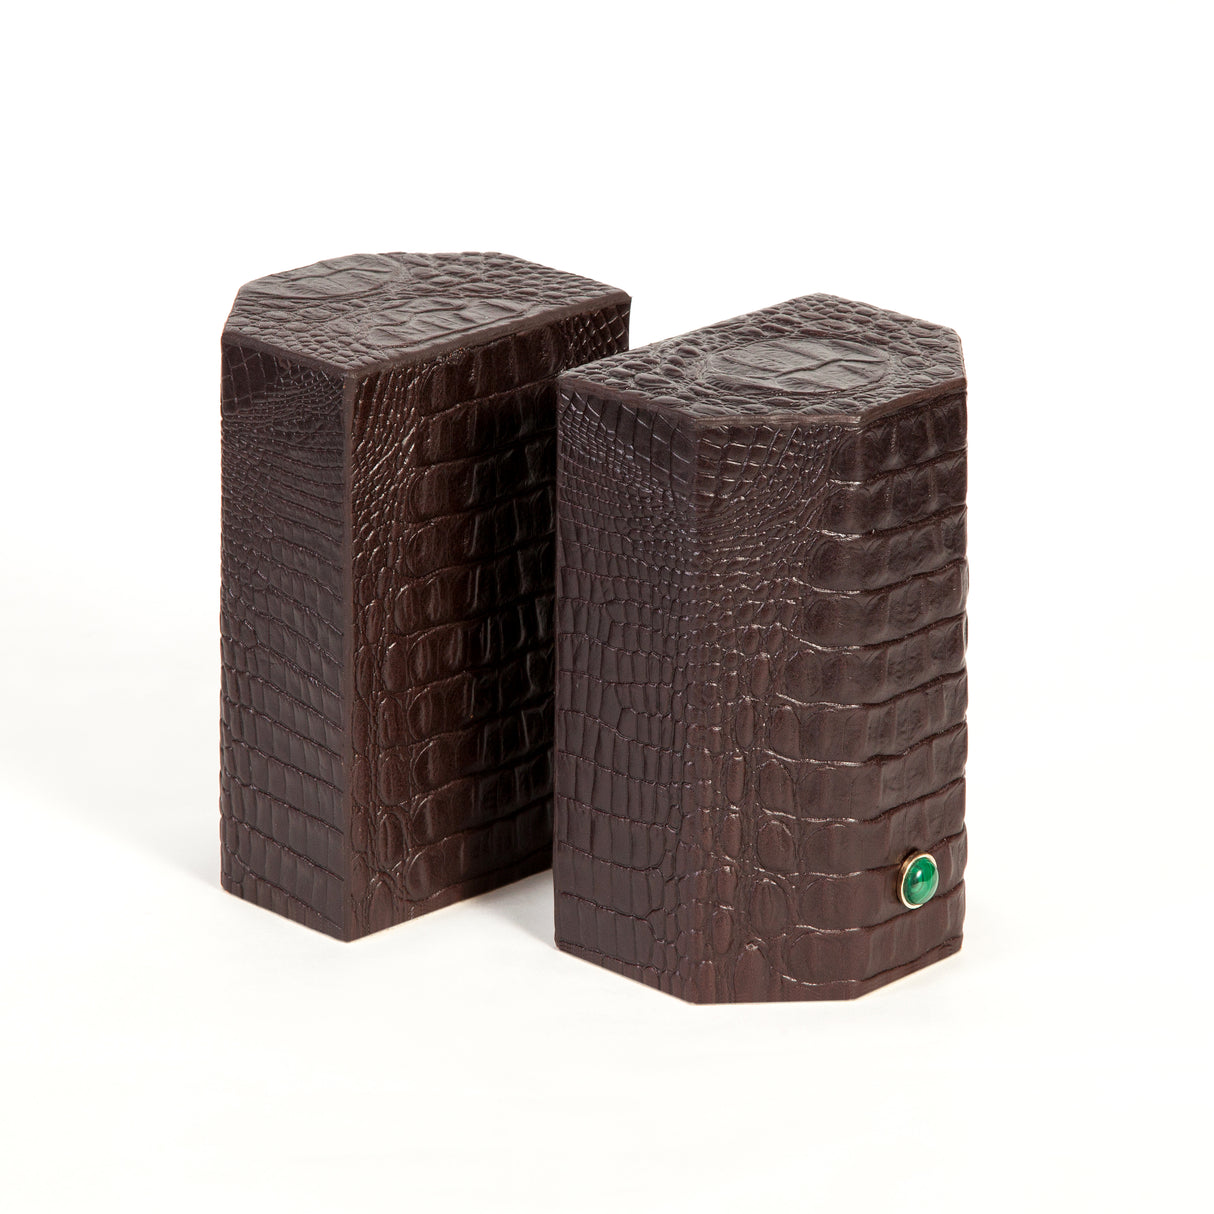 Croco bookends to add style and exotica to any library.  Solid geometric blocks of wood covered in leather are the essential jewels on a bookshelf.  %100 Leather (Embossed Croco)   Jeweled with natural malachite stones